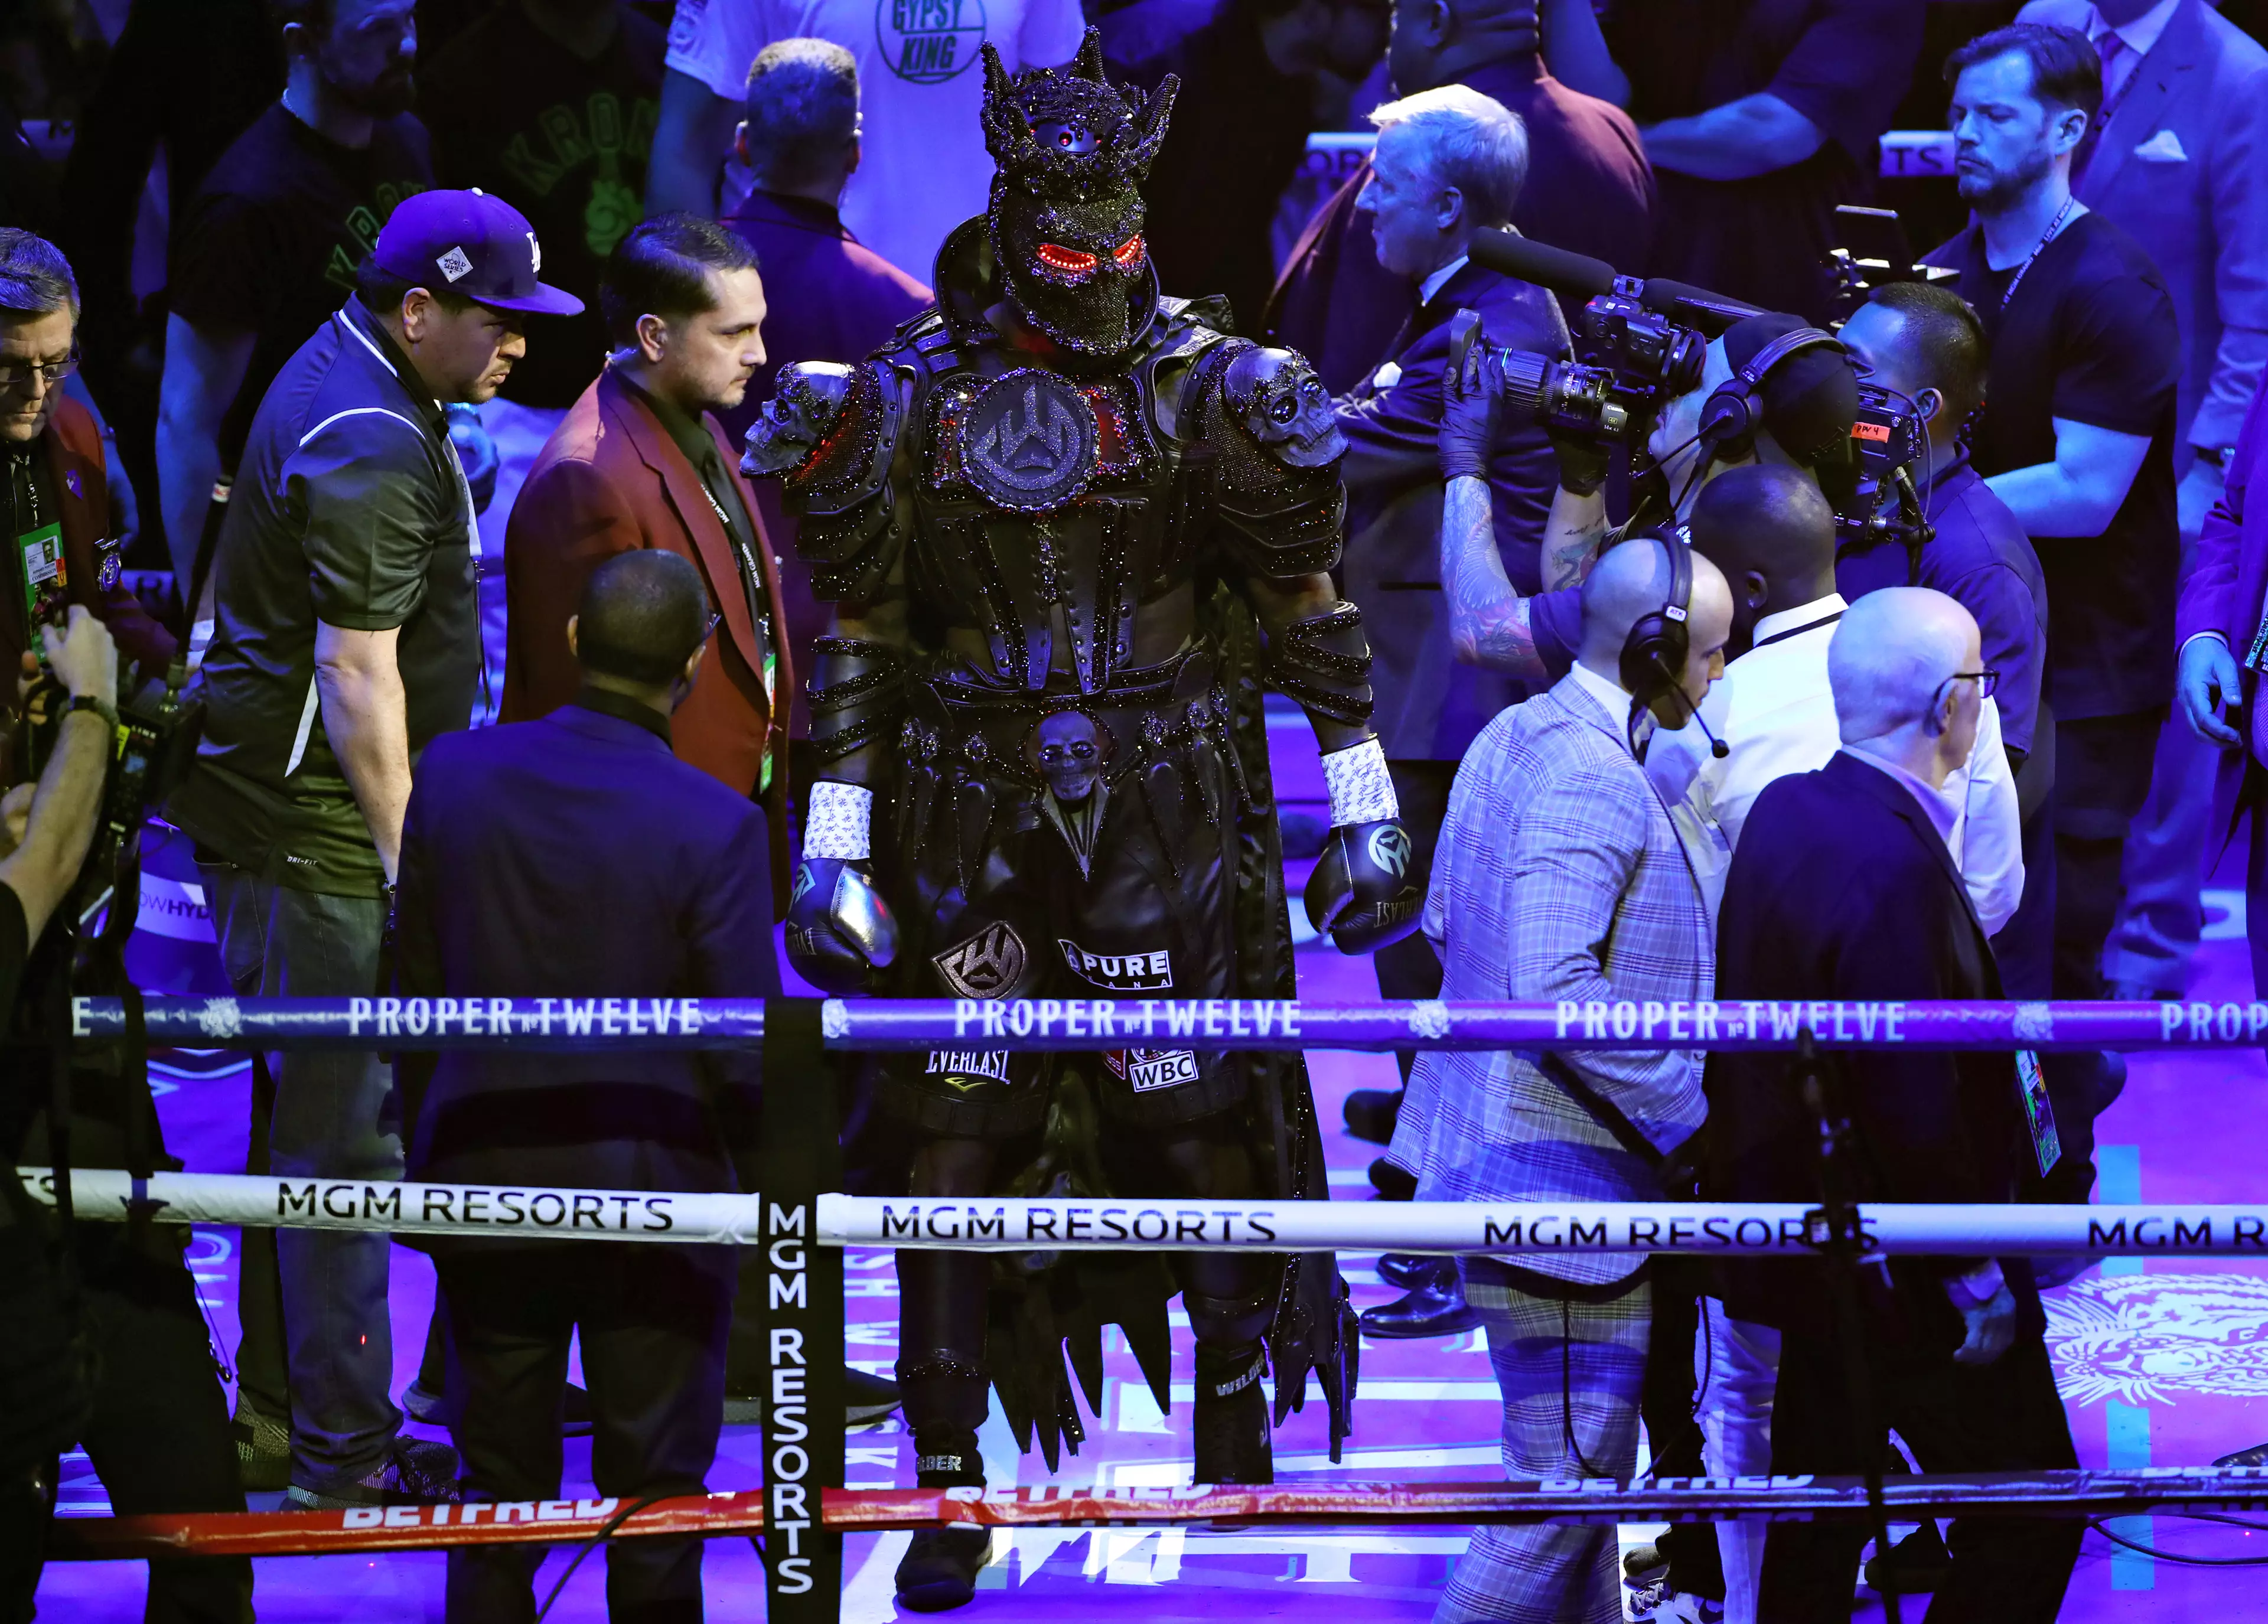 Wilder's full ring gear. Image: PA Images